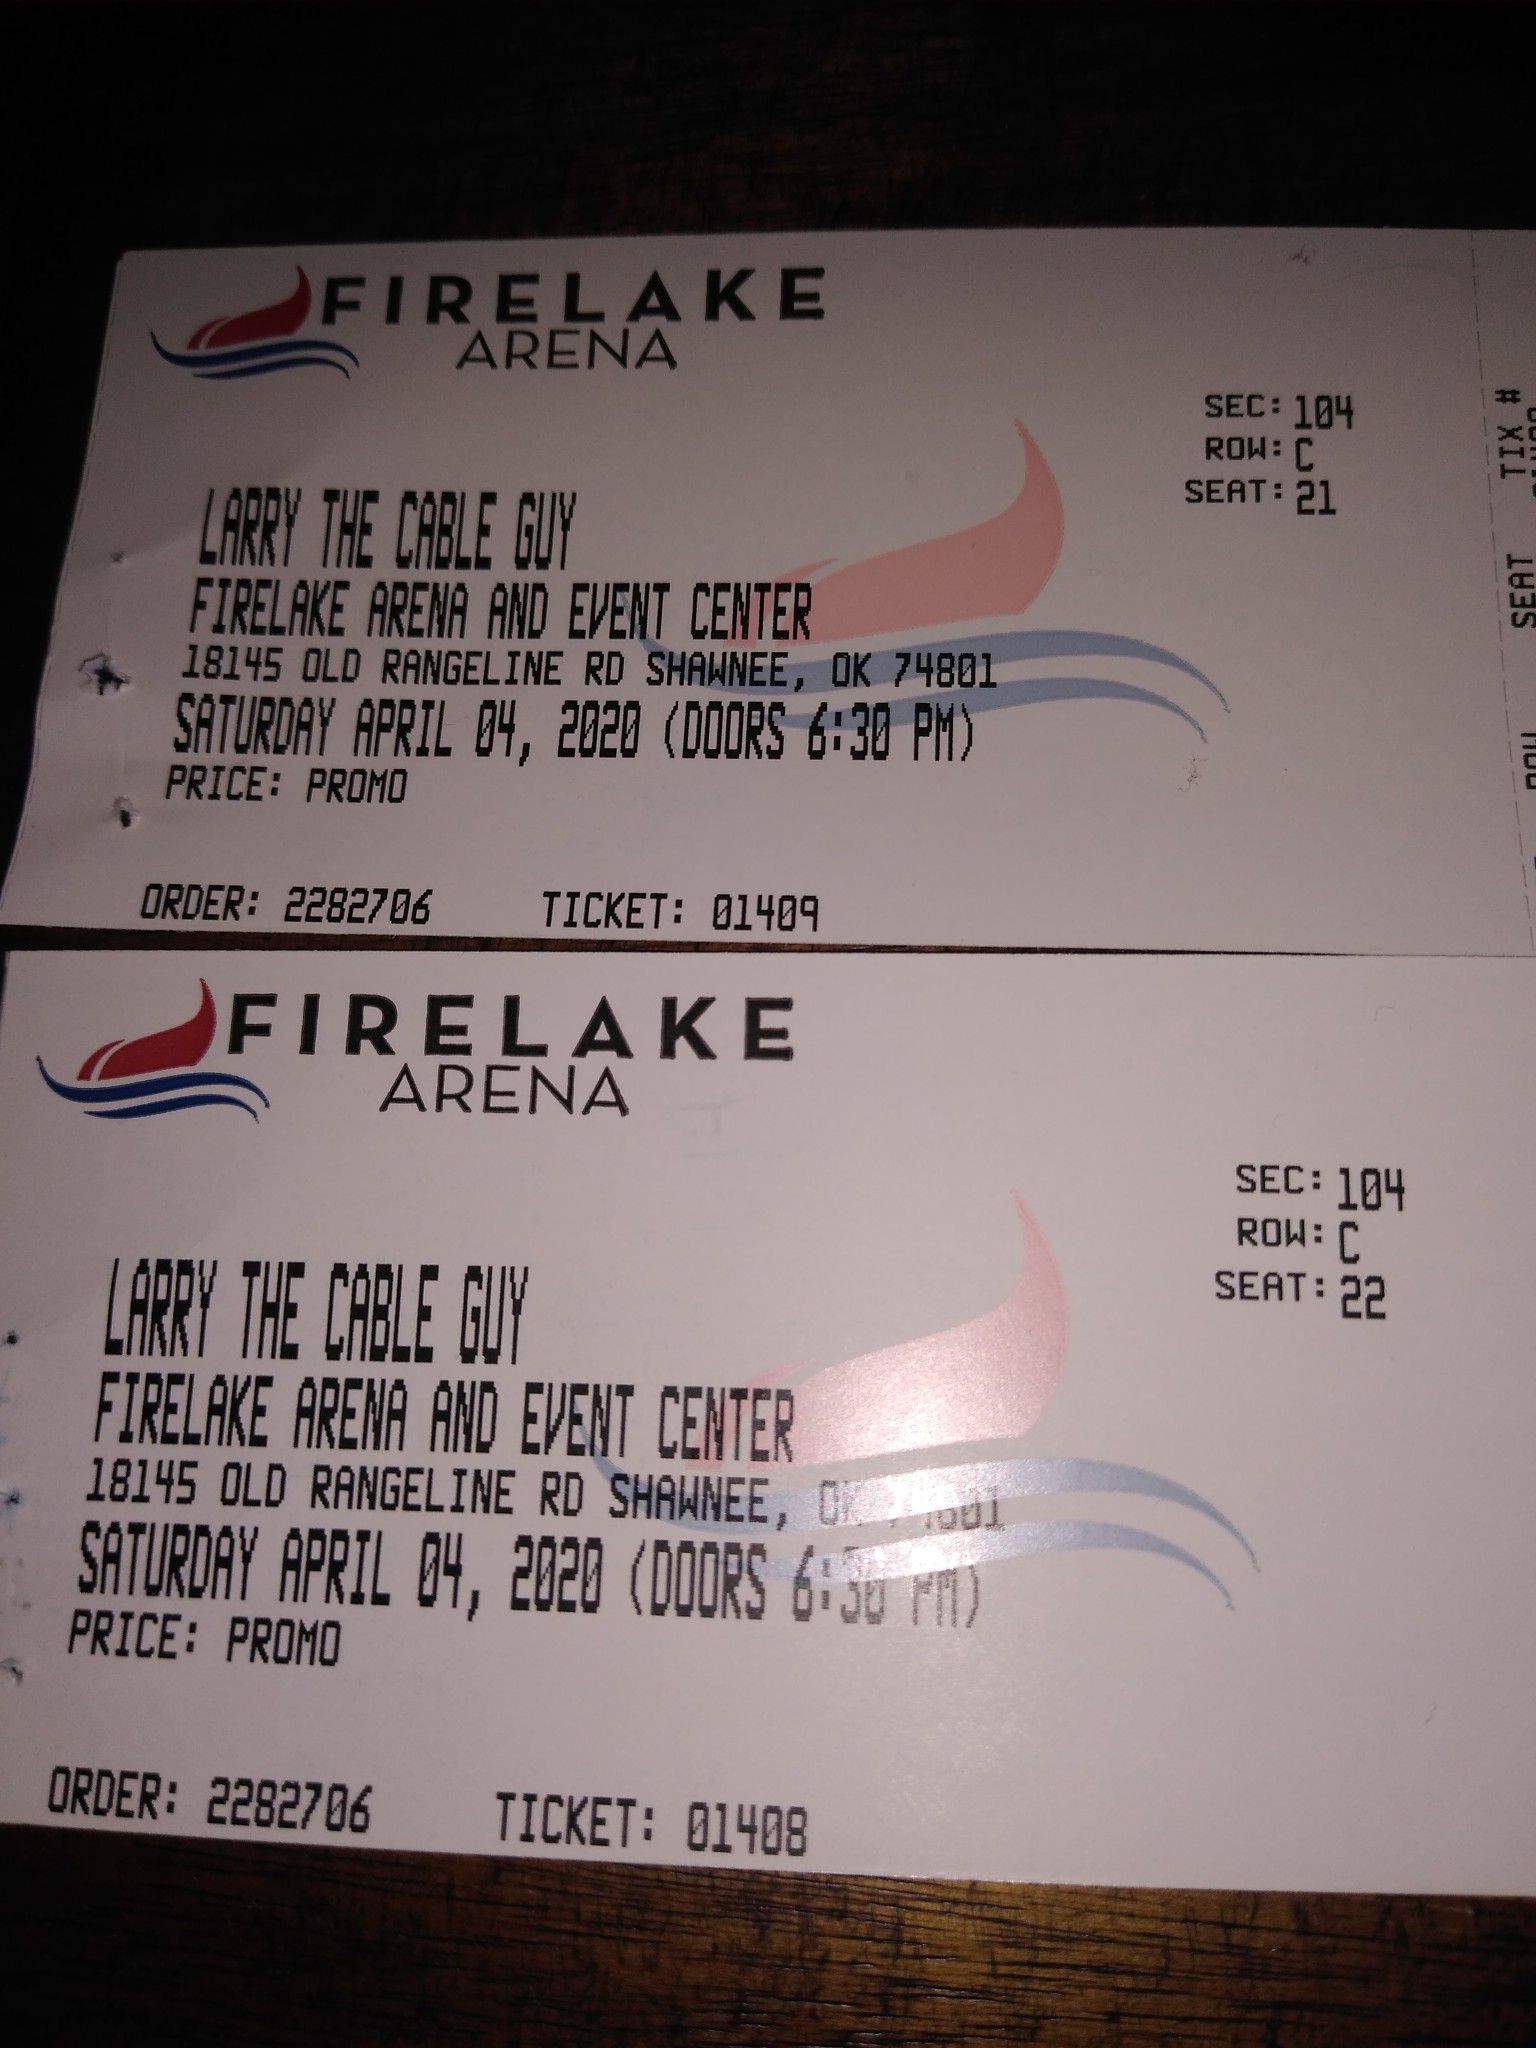 Larry the Cable Guy tickets